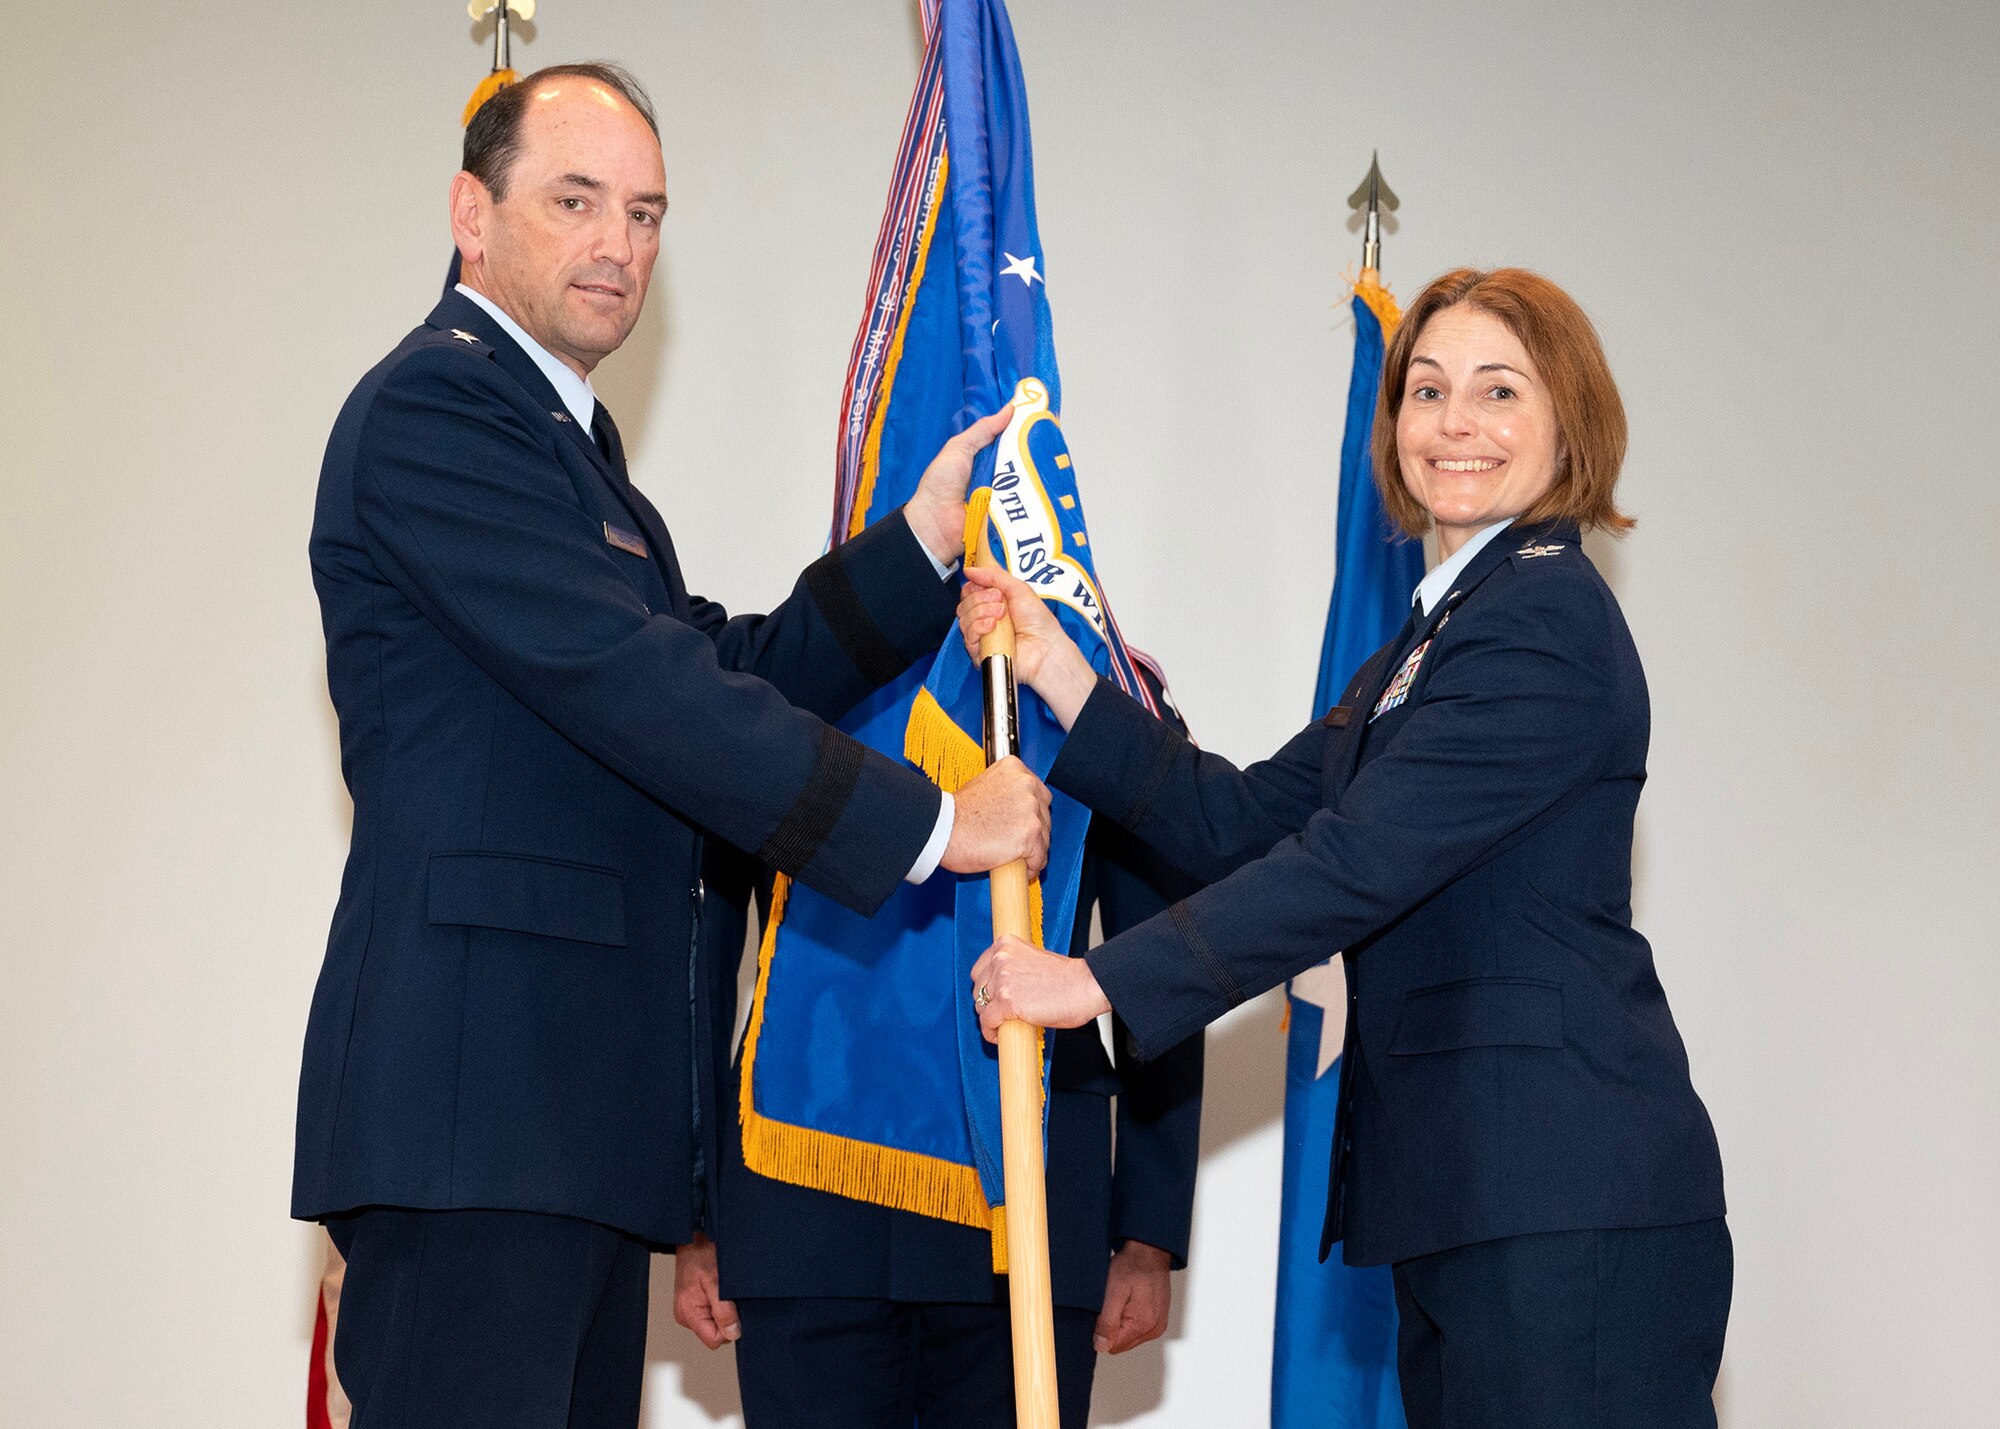 U.S. Air Force Lt. Gen. Kevin B. Kennedy, 16th Air Force (Air Forces Cyber) commander, gives the 70th Intelligence, Surveillance and Reconnaissance Wing guidon to U.S. Air Force Col. Celina E. Noyes, 70th ISRW commander, during a Change of Command Ceremony June 9, 2023, at Fort George G. Meade, Maryland. Kennedy was the presiding officer for the ceremony, which U.S. Air Force Col. Craig S. Miller relinquished command of the 70th ISRW to Noyes. (U.S. photo by Staff Sgt. Kevin Iinuma)